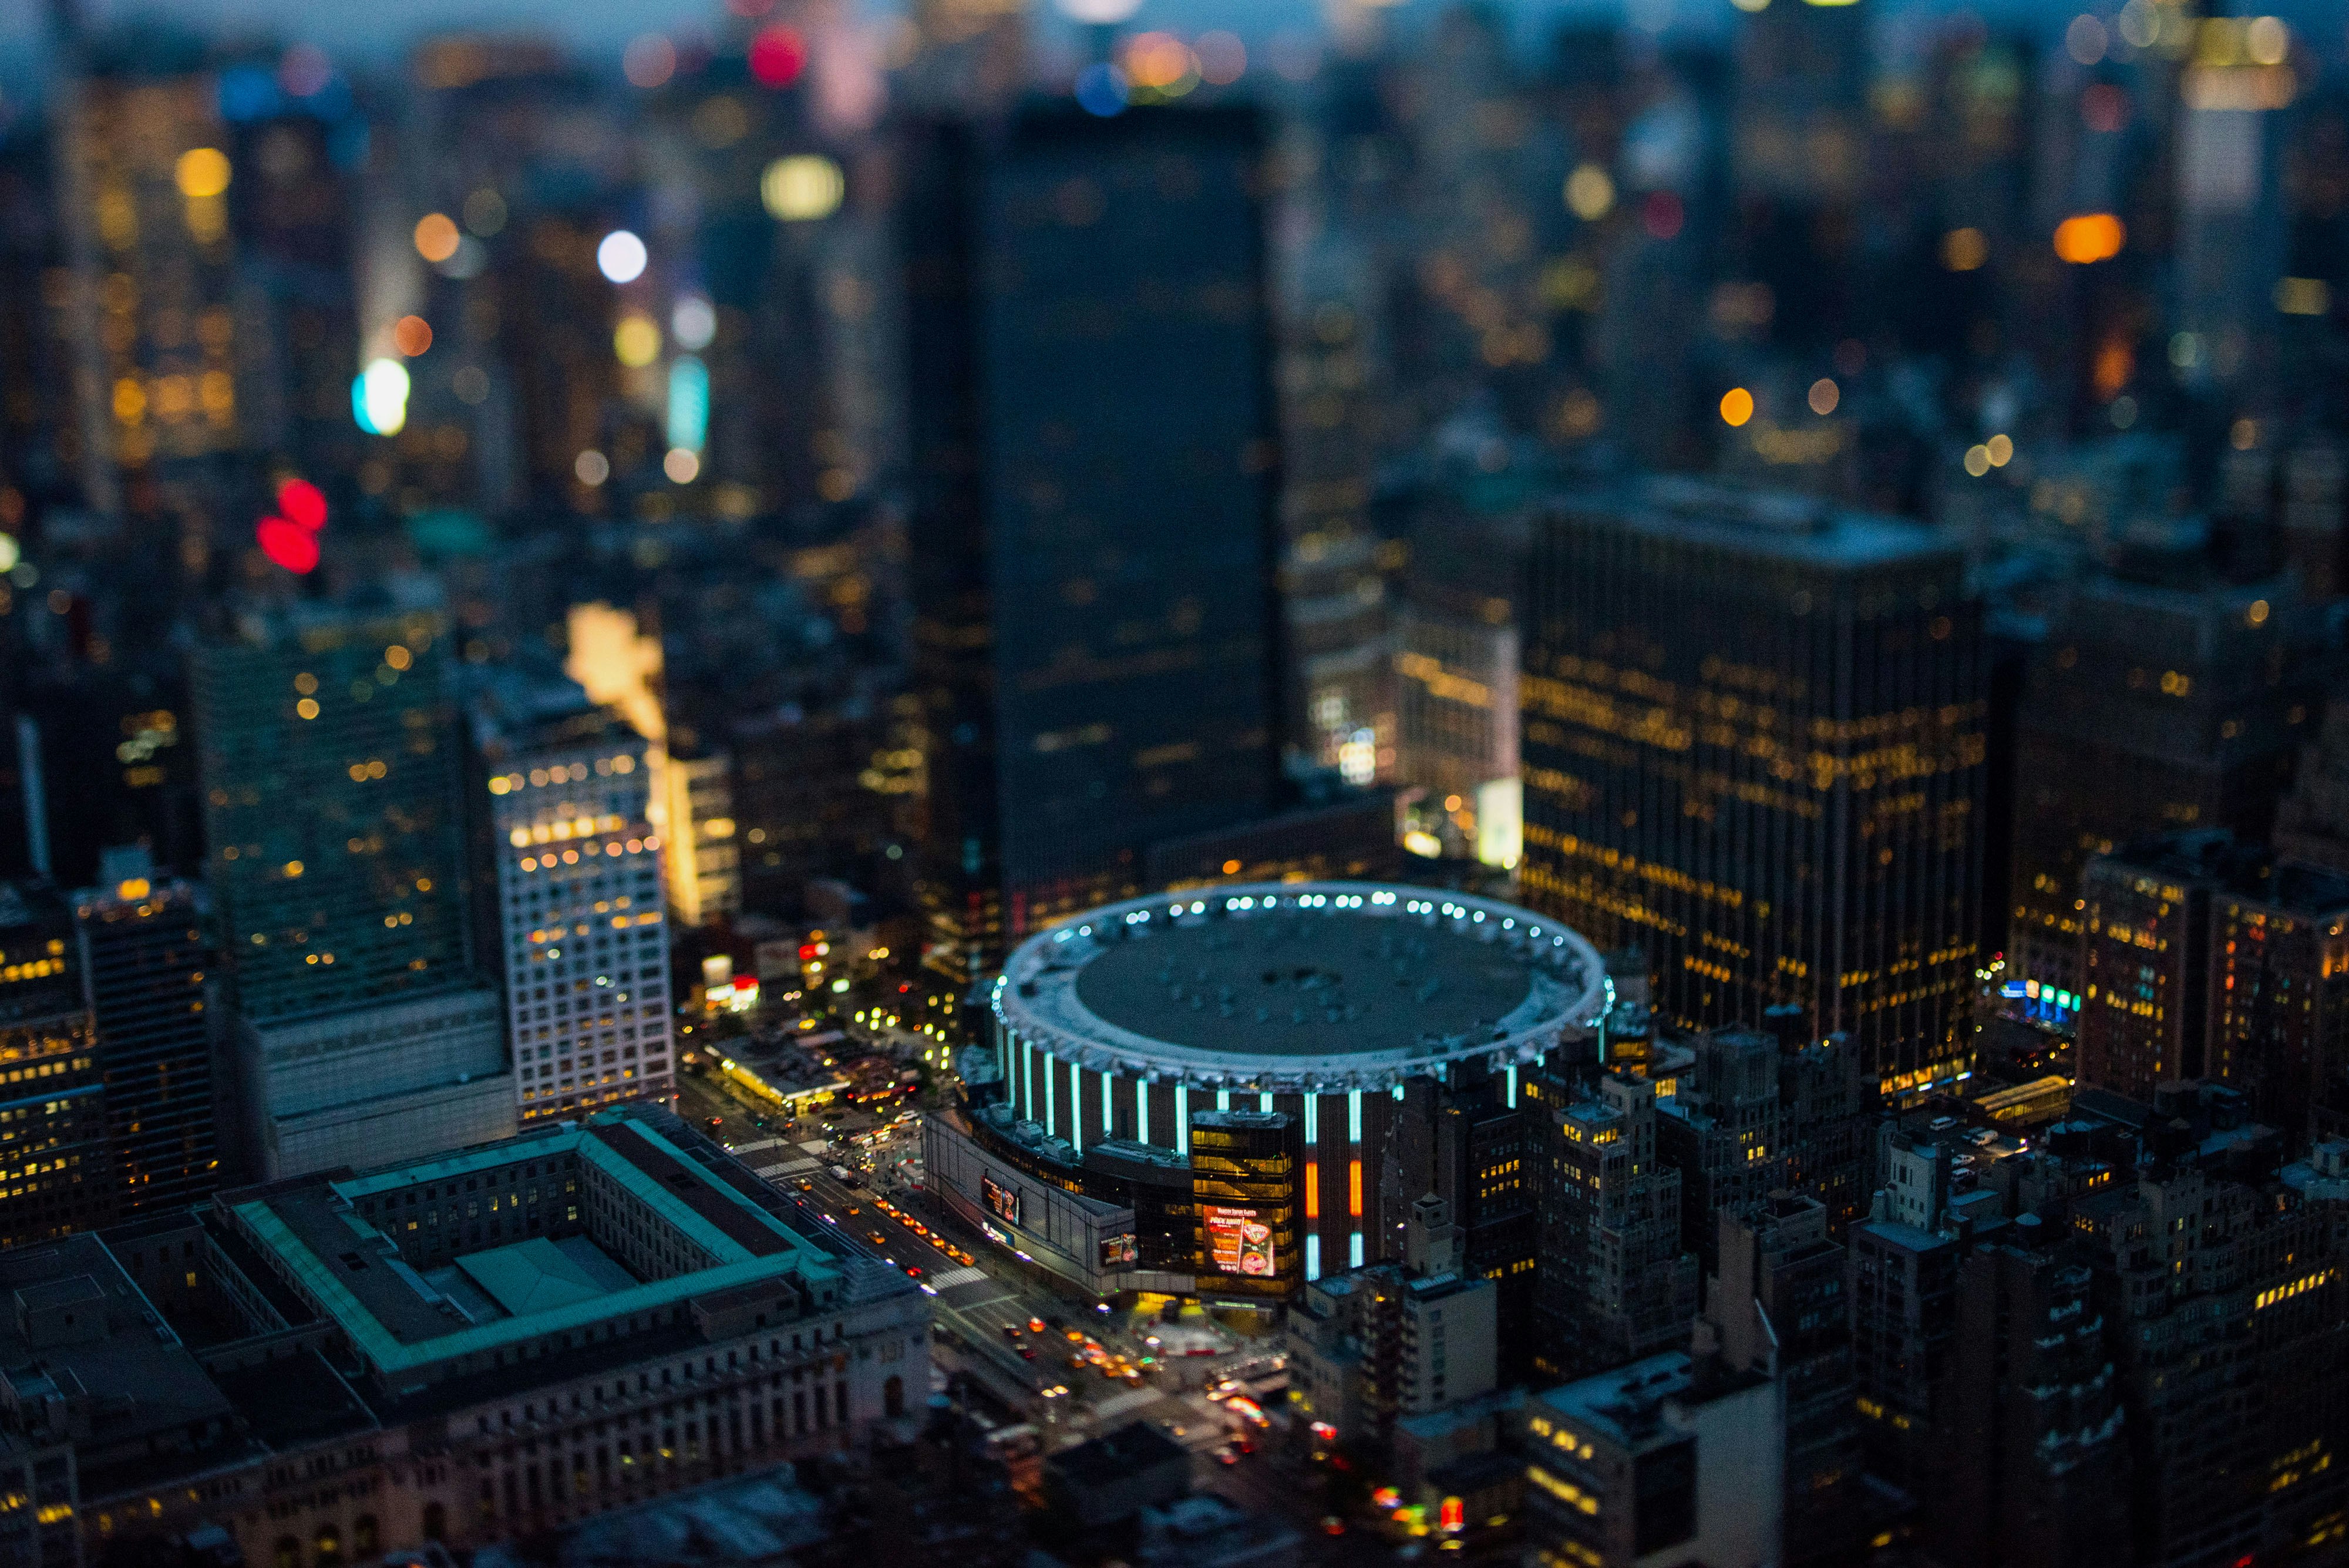 Madison Square Garden stands in Manhattan at dusk in this aerial photograph taken with a tilt-shift lens above New York